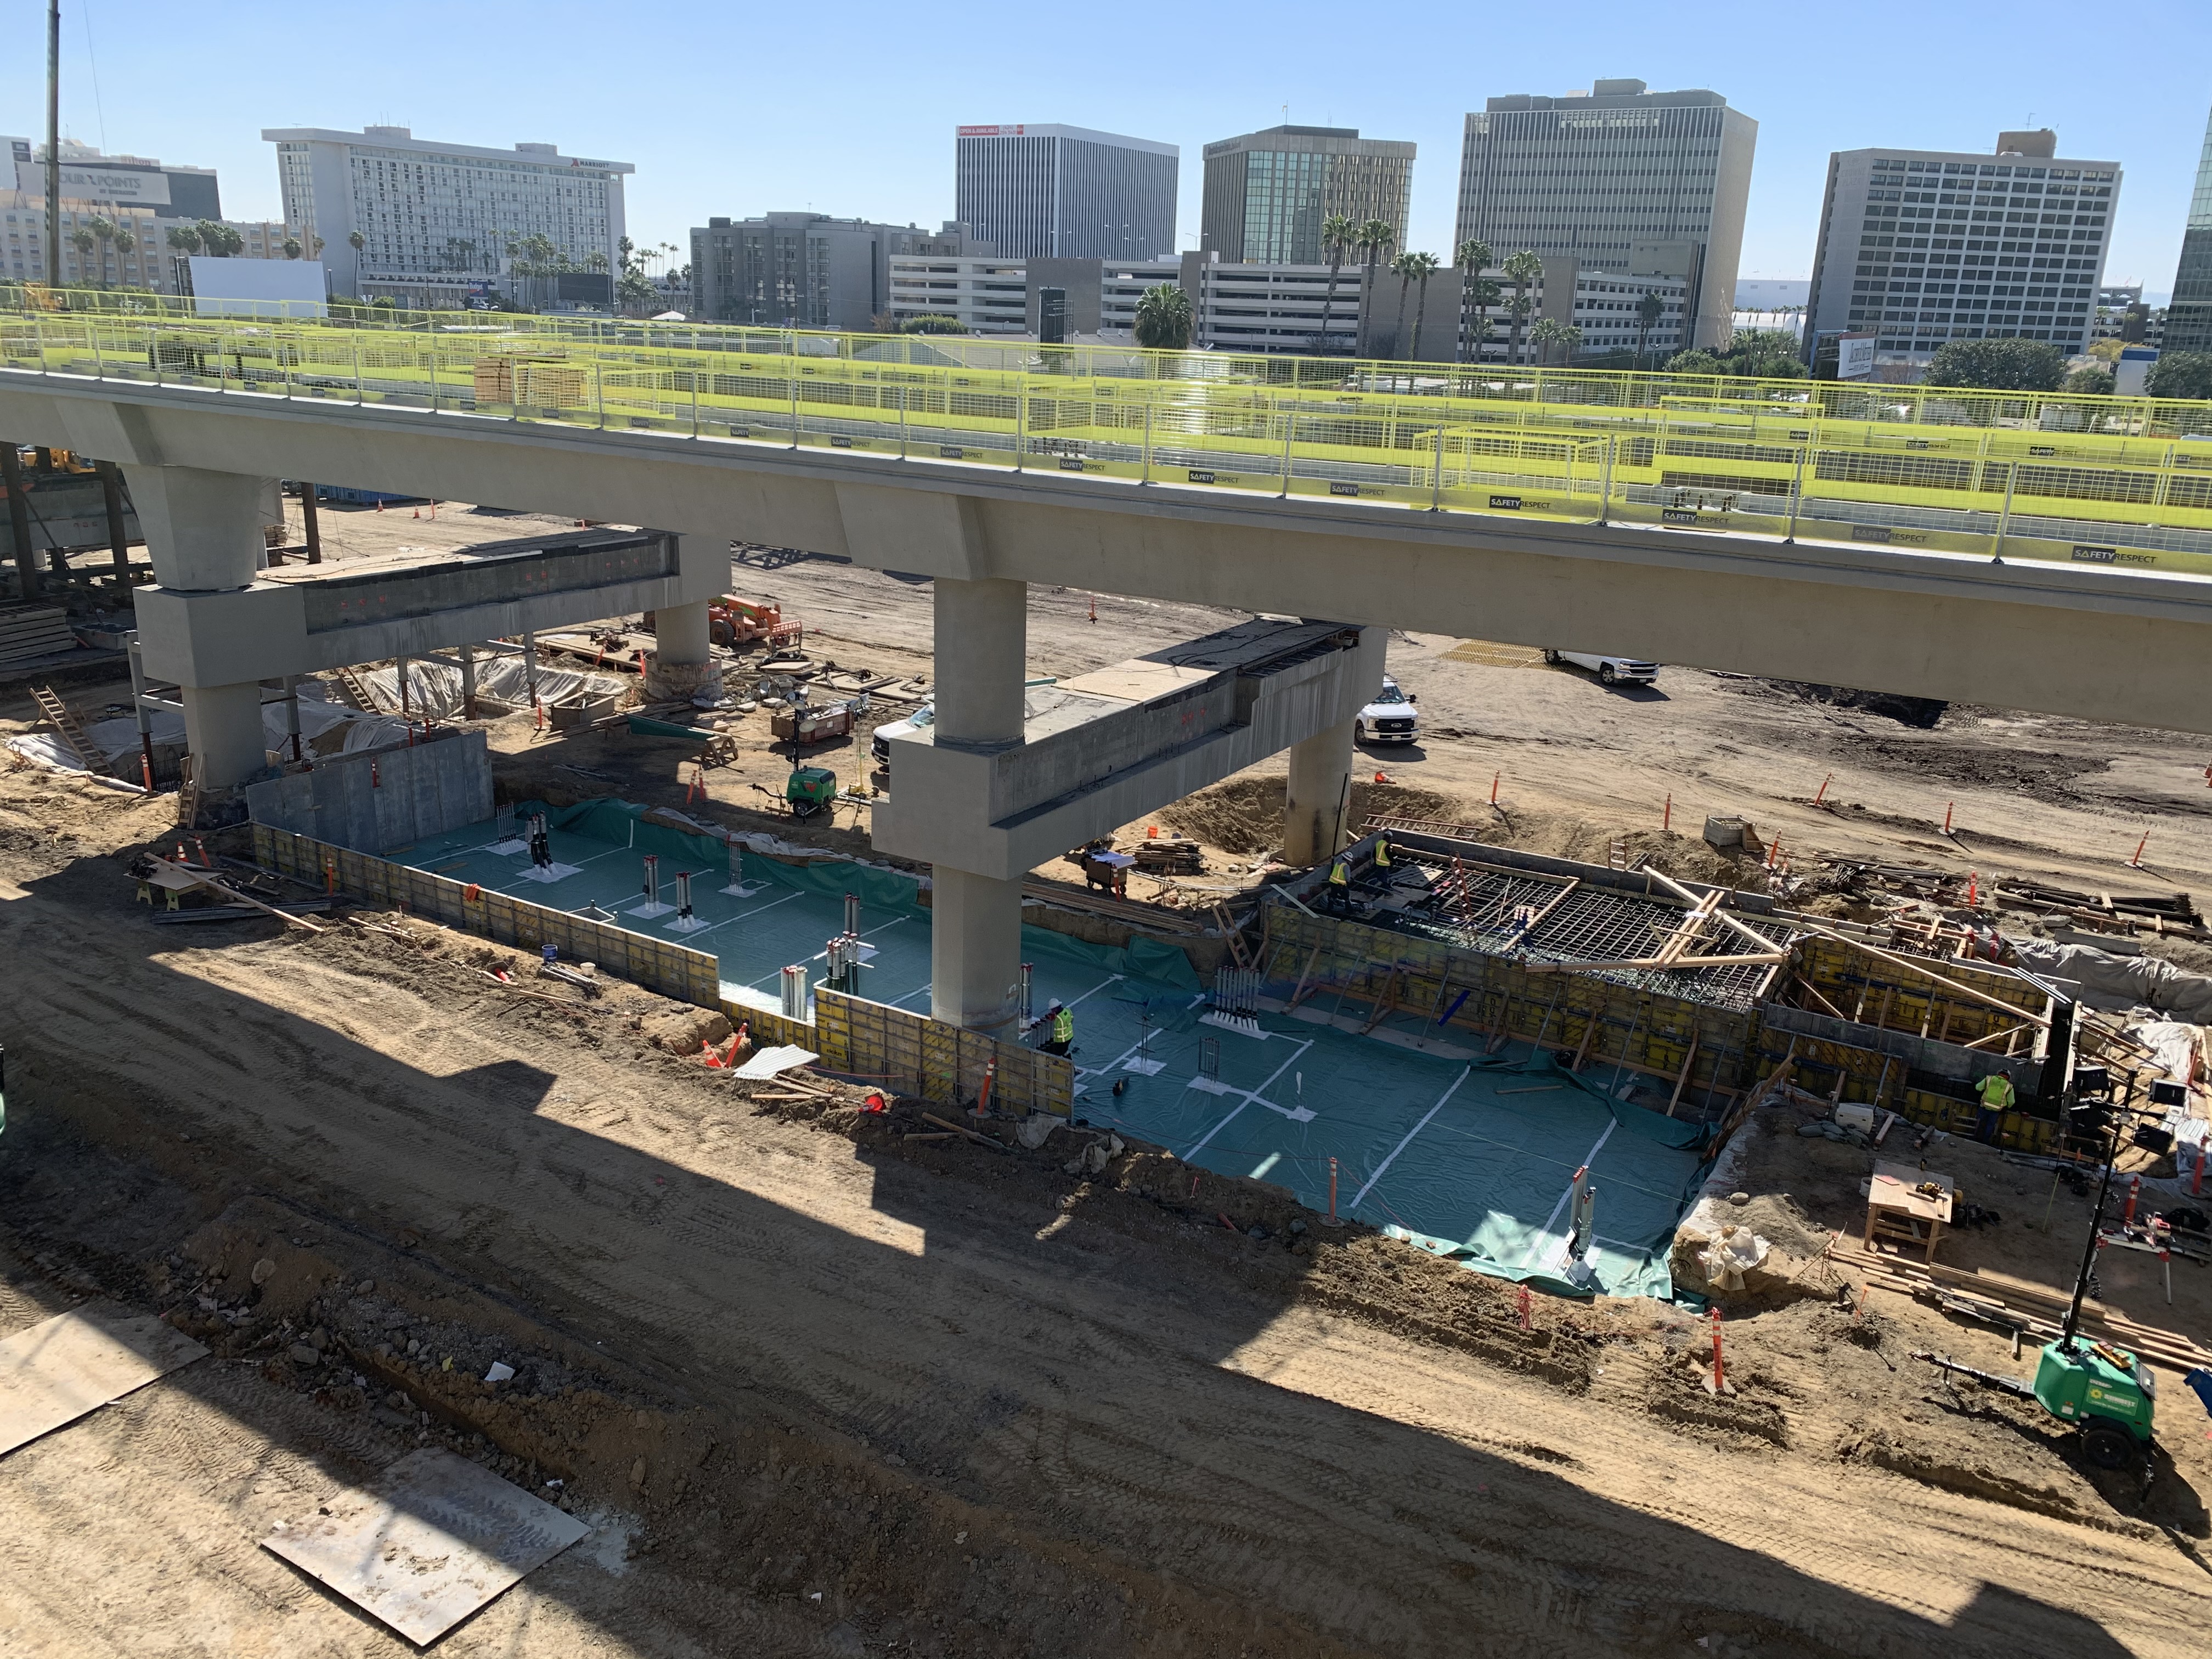 A view of the Intermodal Transportation Facility-West station construction and Automated People Mover guideway.